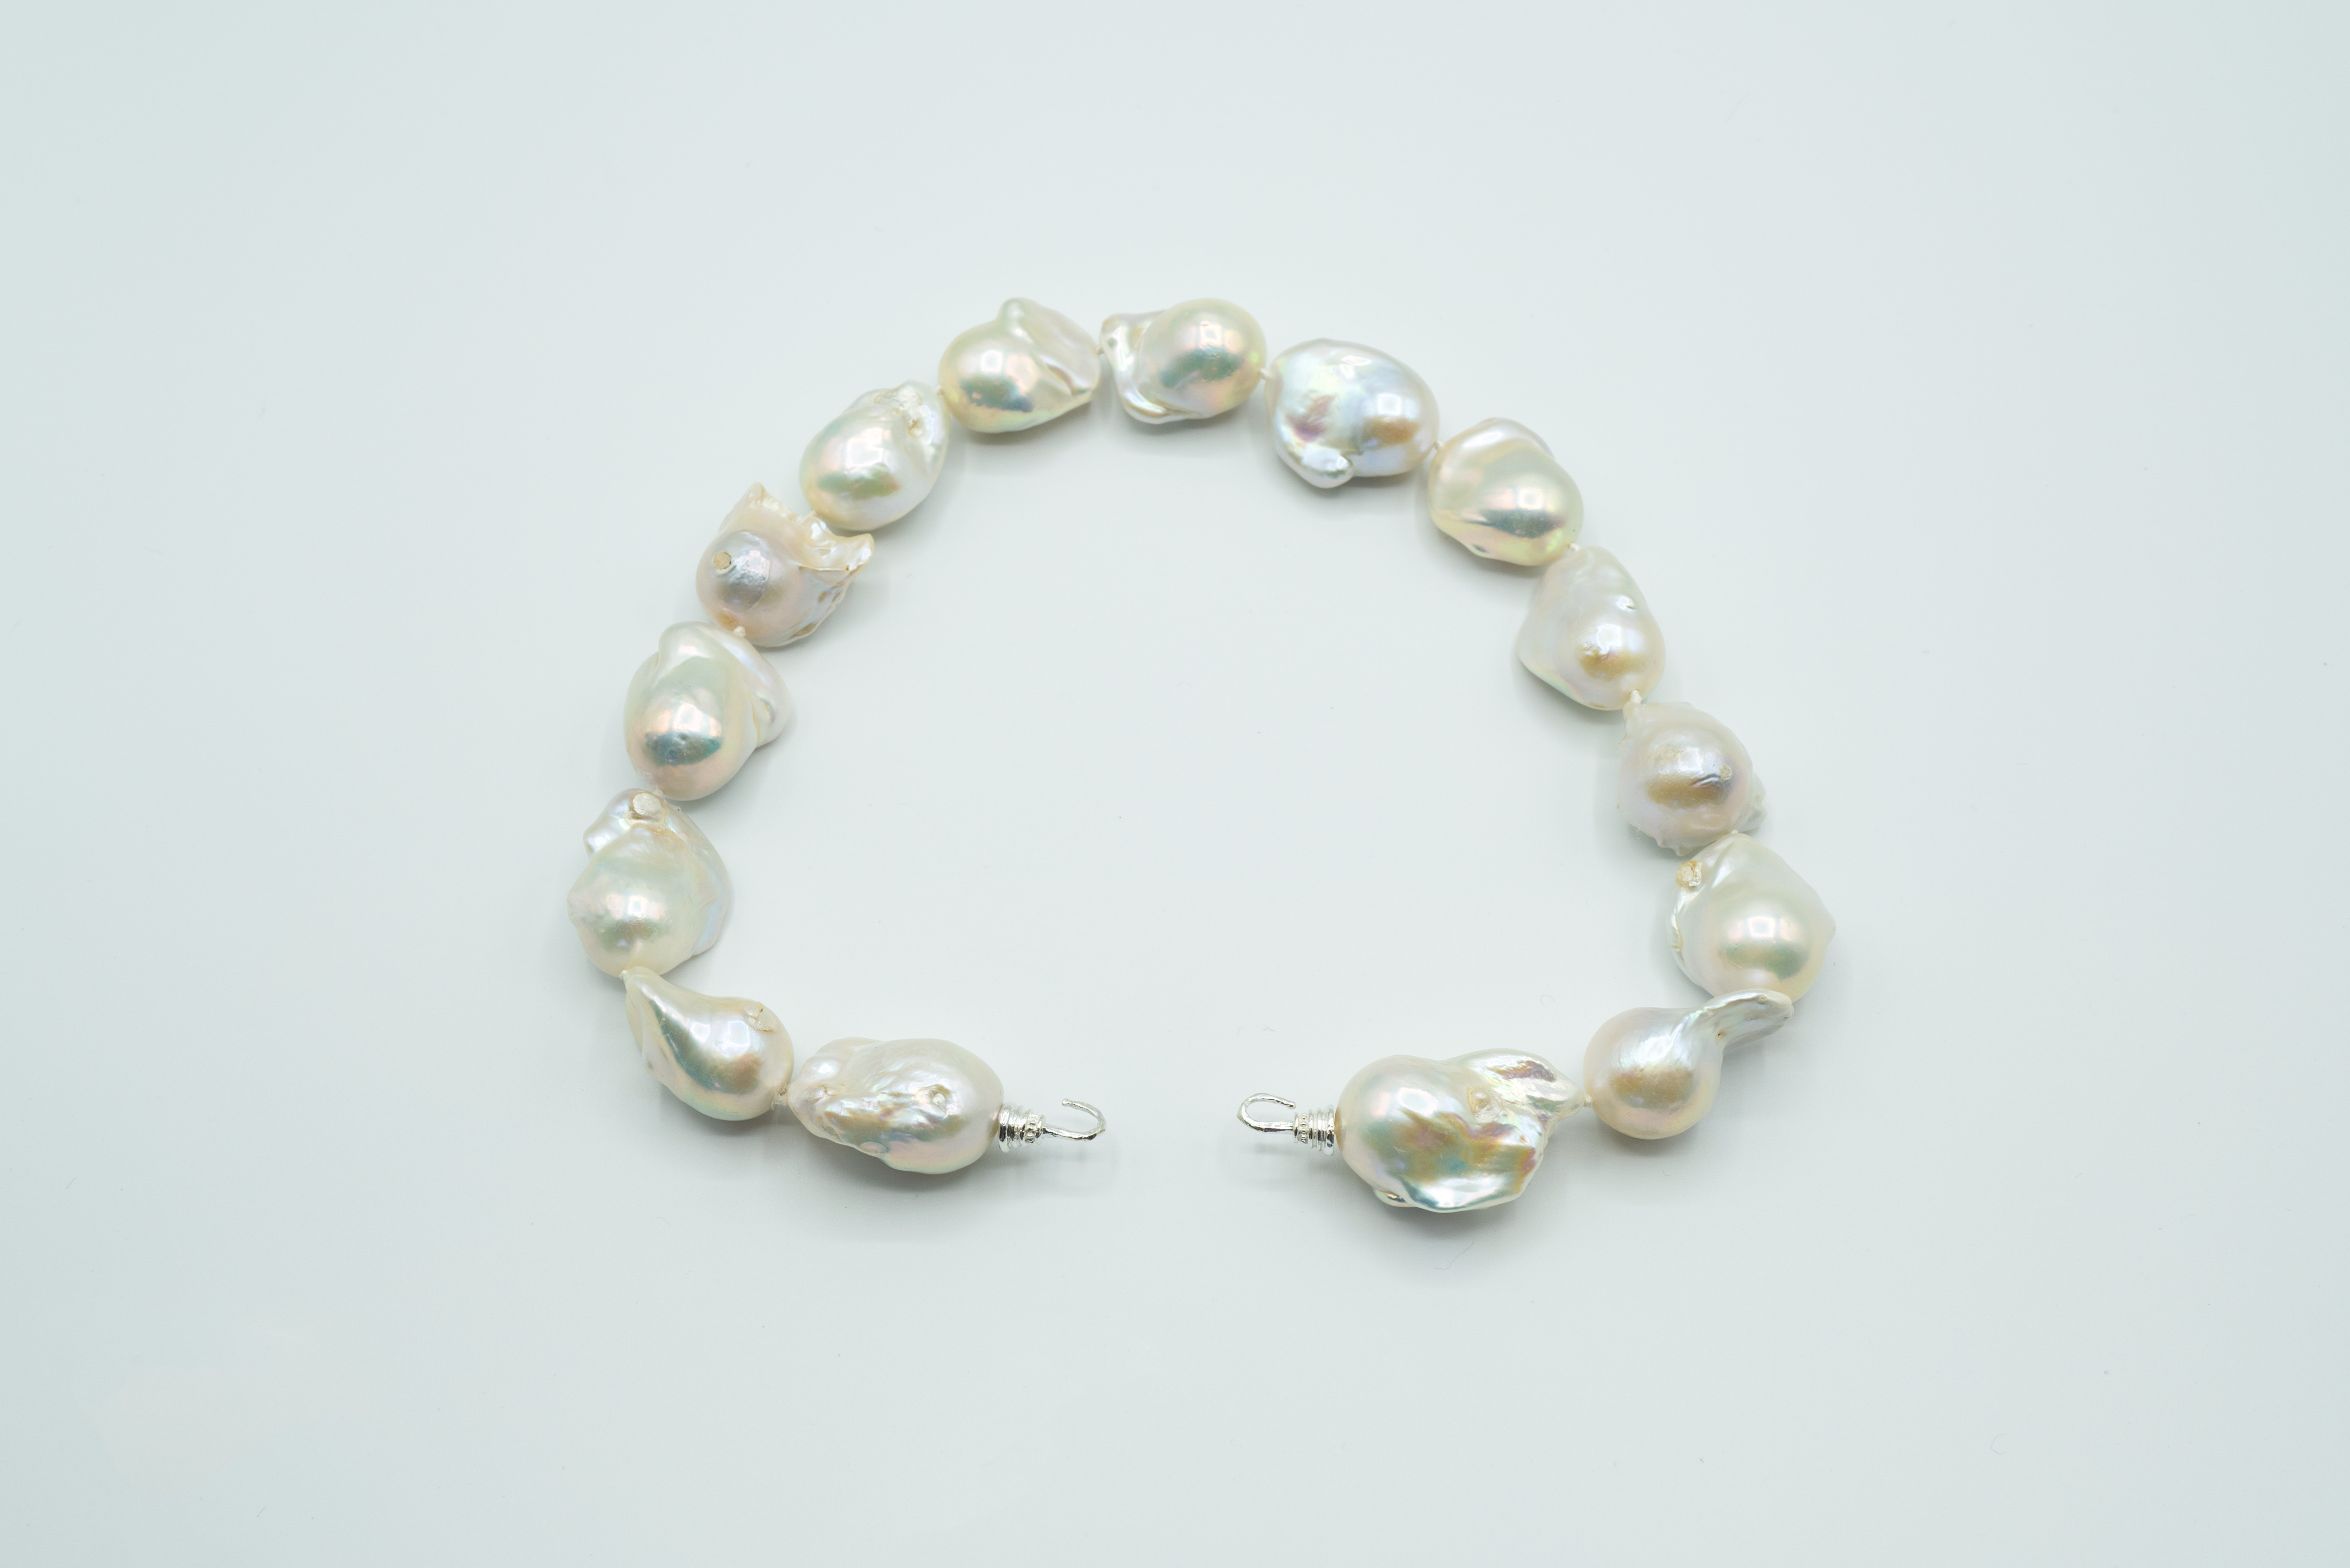 Jumbo Freshwater Baroque Pearls, Smooth Texture Hand Knotted on Hand Cast Bronze Hooks. Unusual and rare pearls approx.